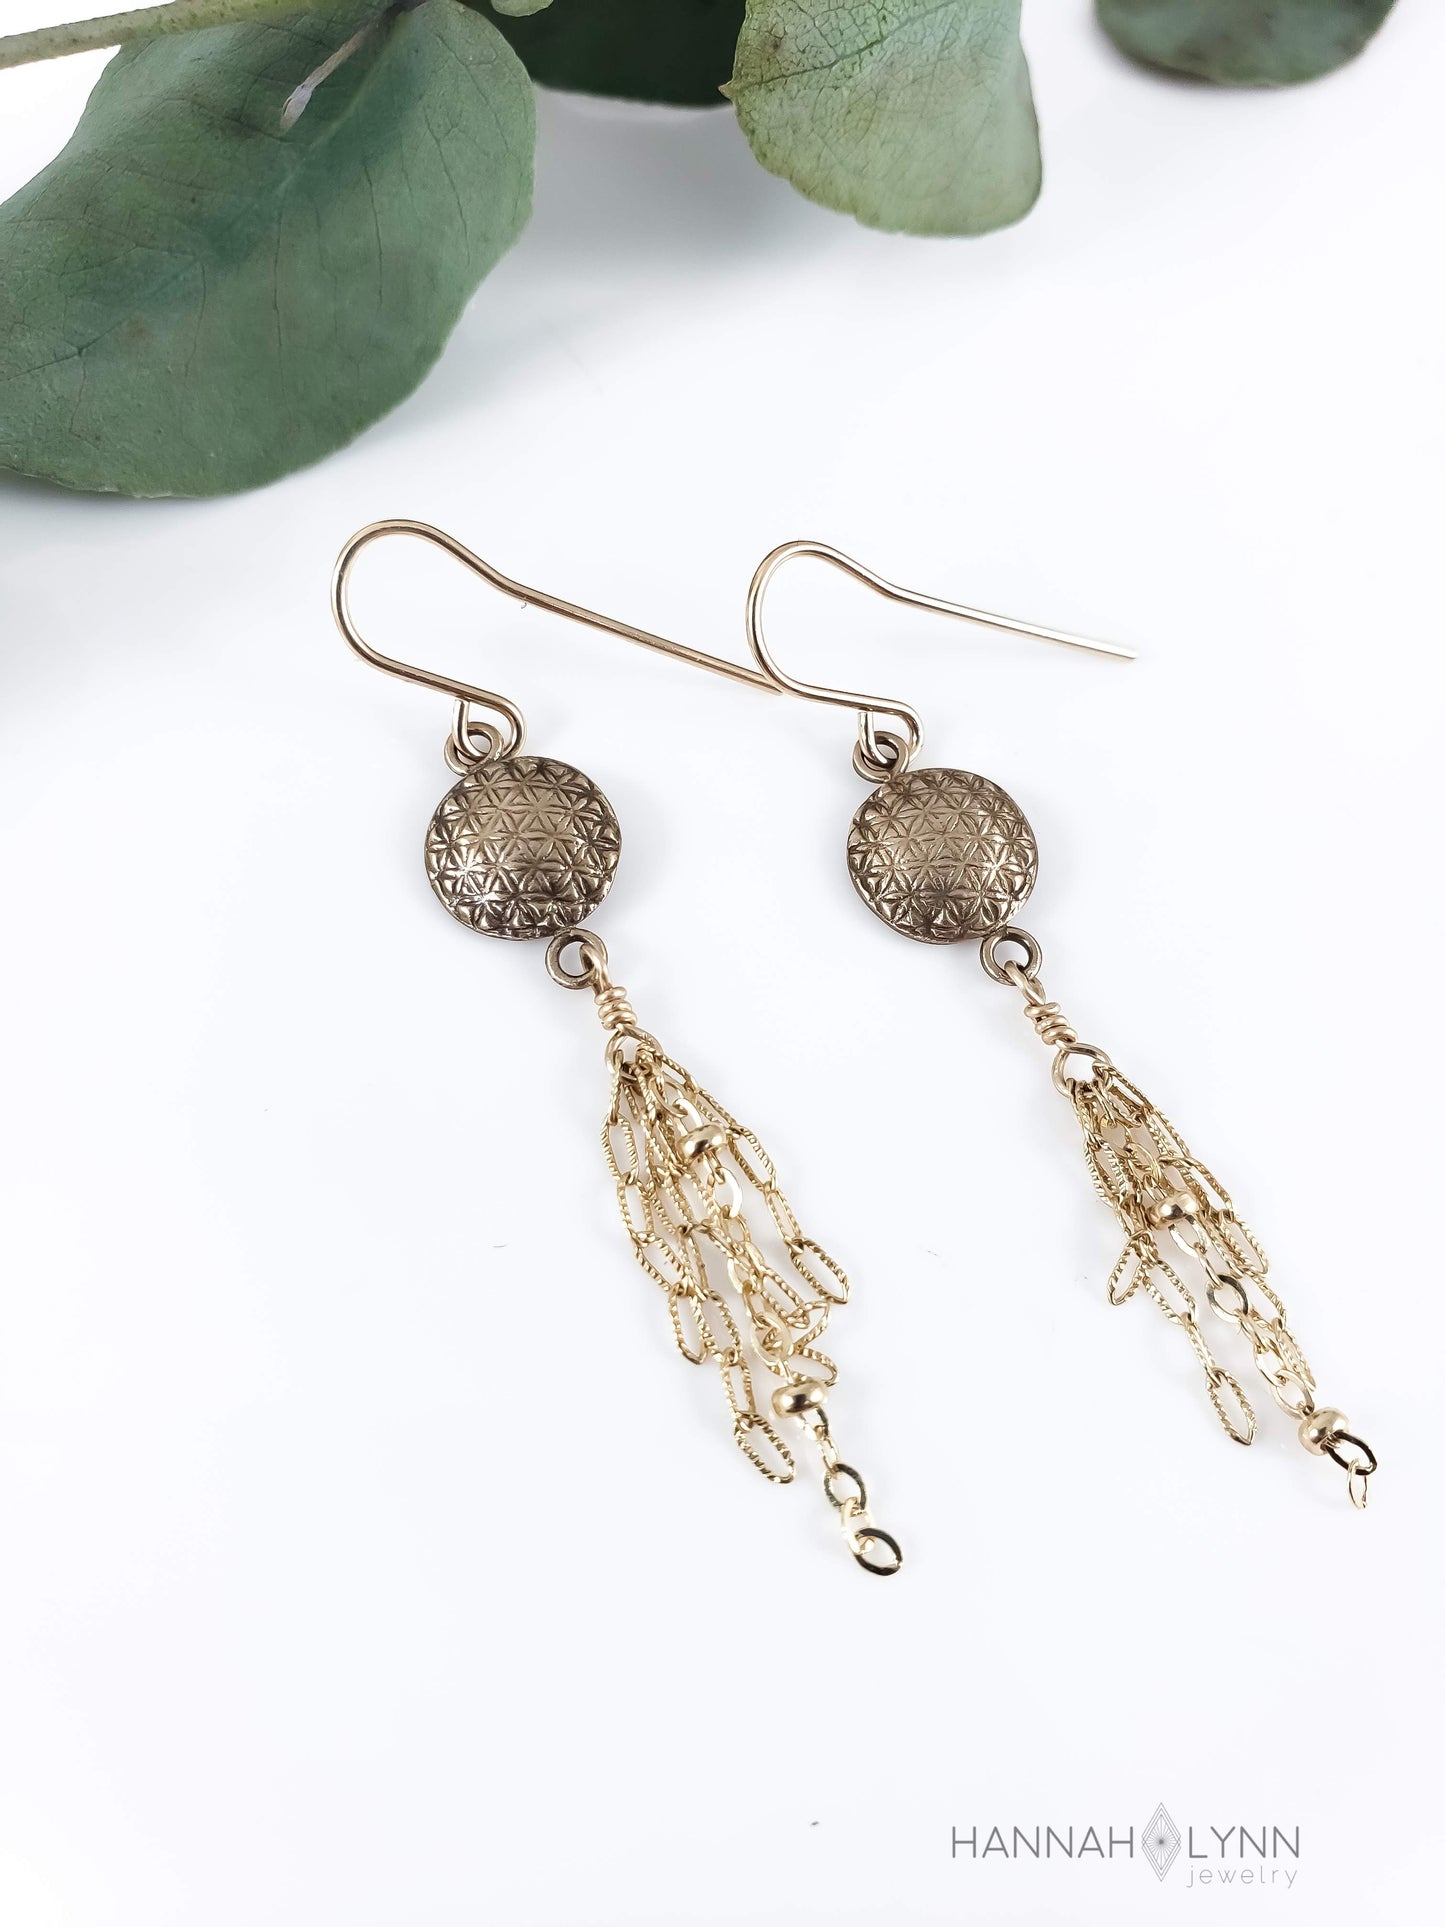 Flower of Life Tassel Earrings Available in Sterling Silver or Bronze & 14K Gold Filled